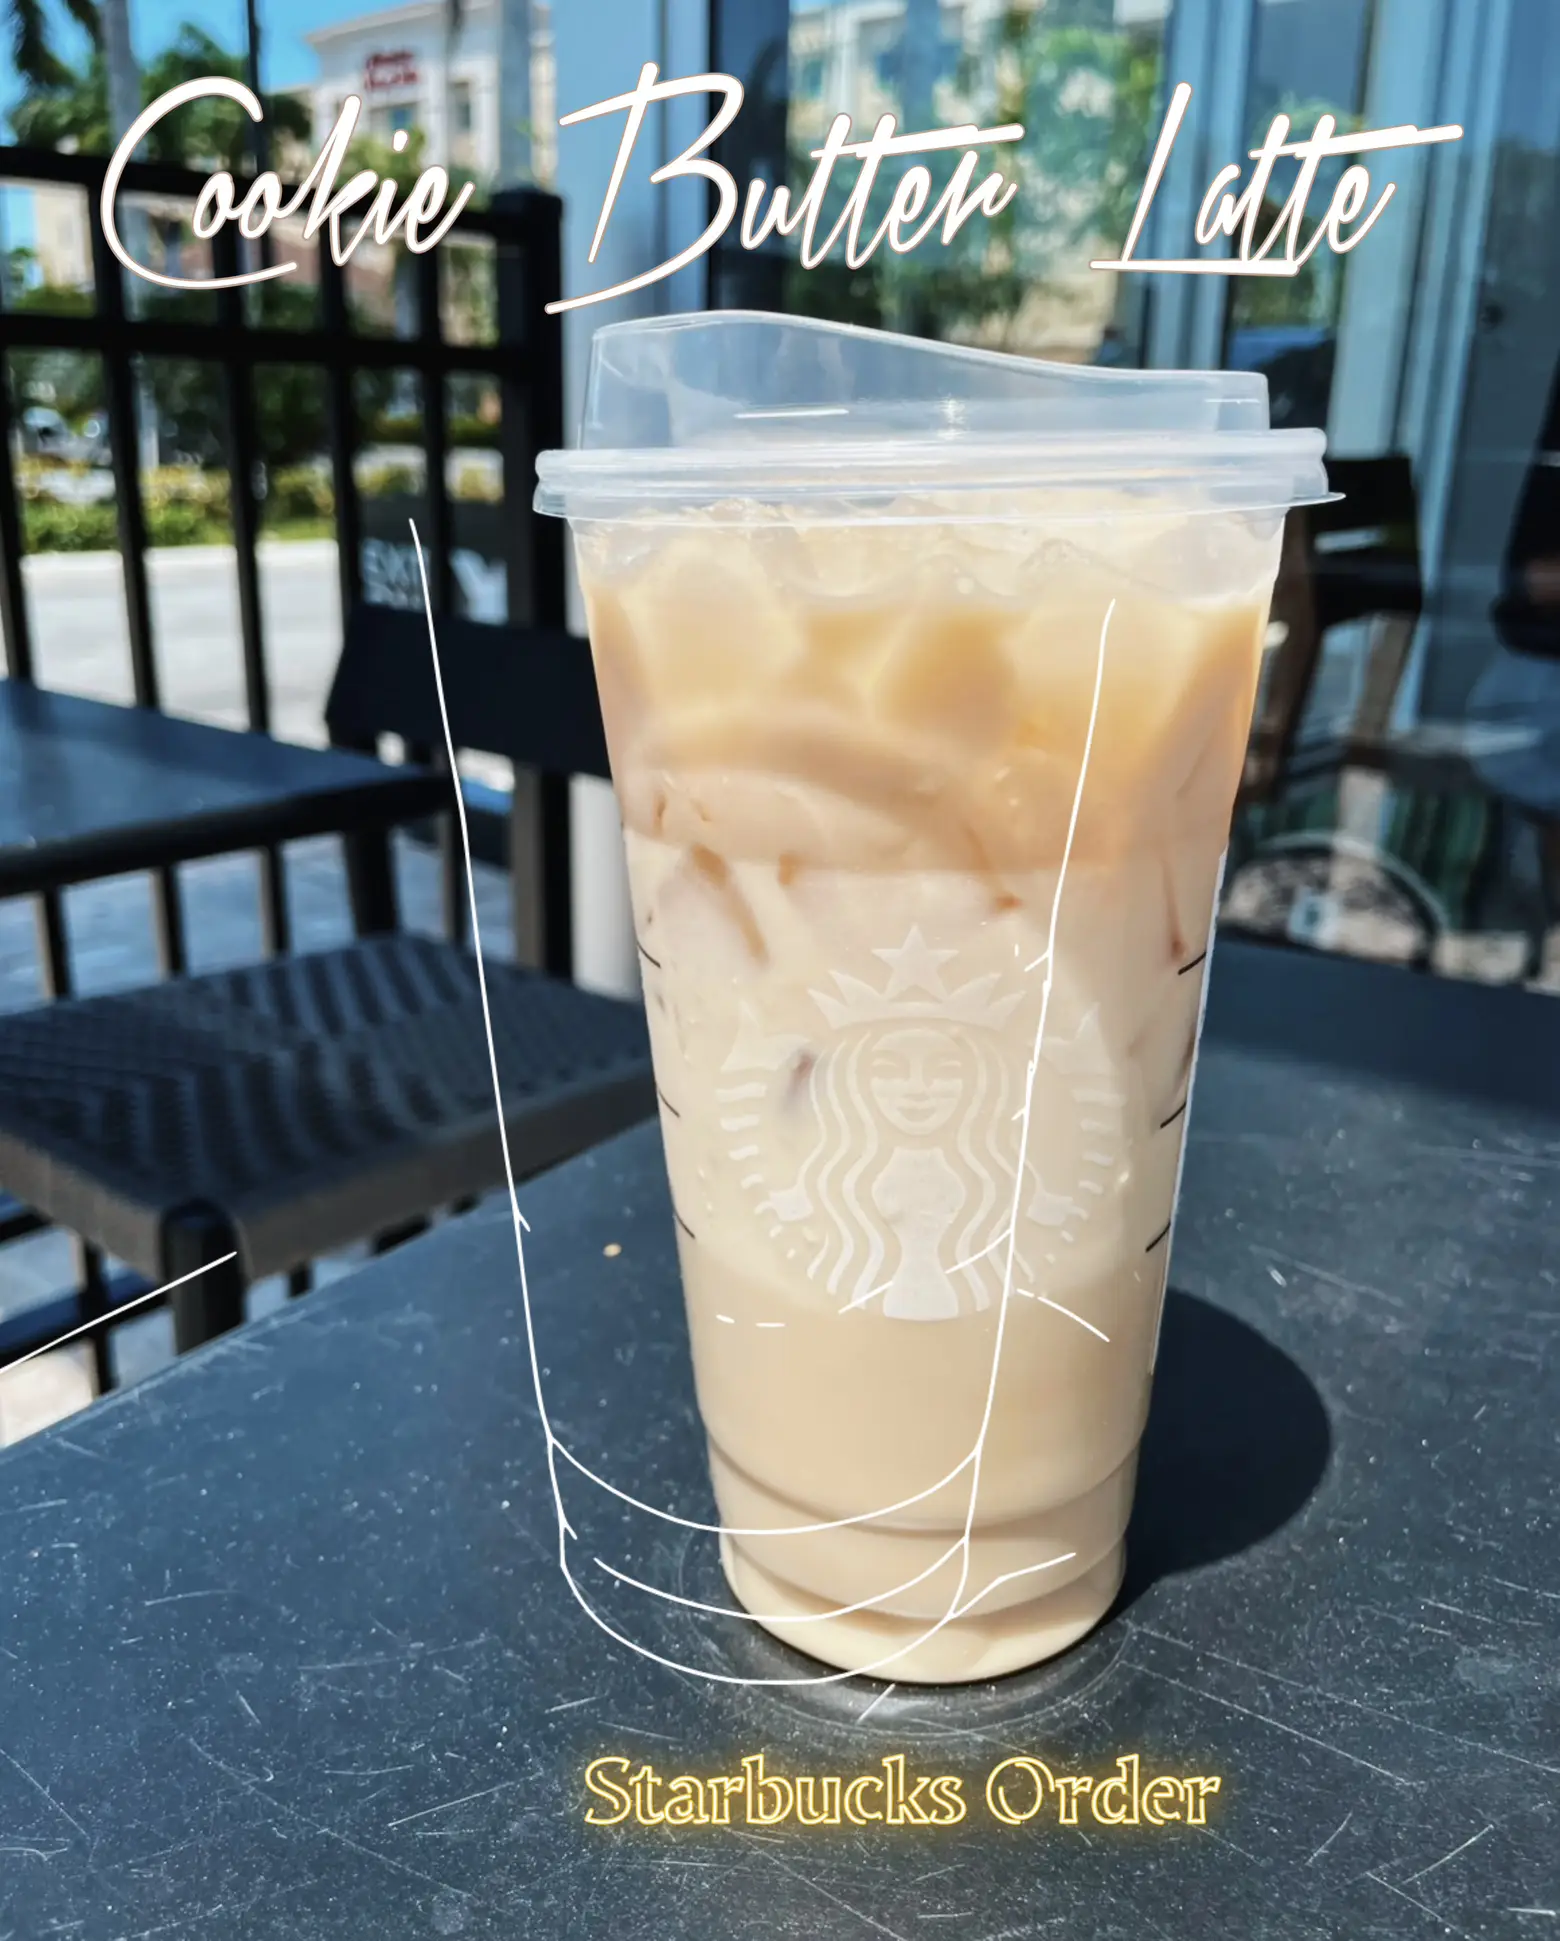 Cookie Butter Iced Latte 's images